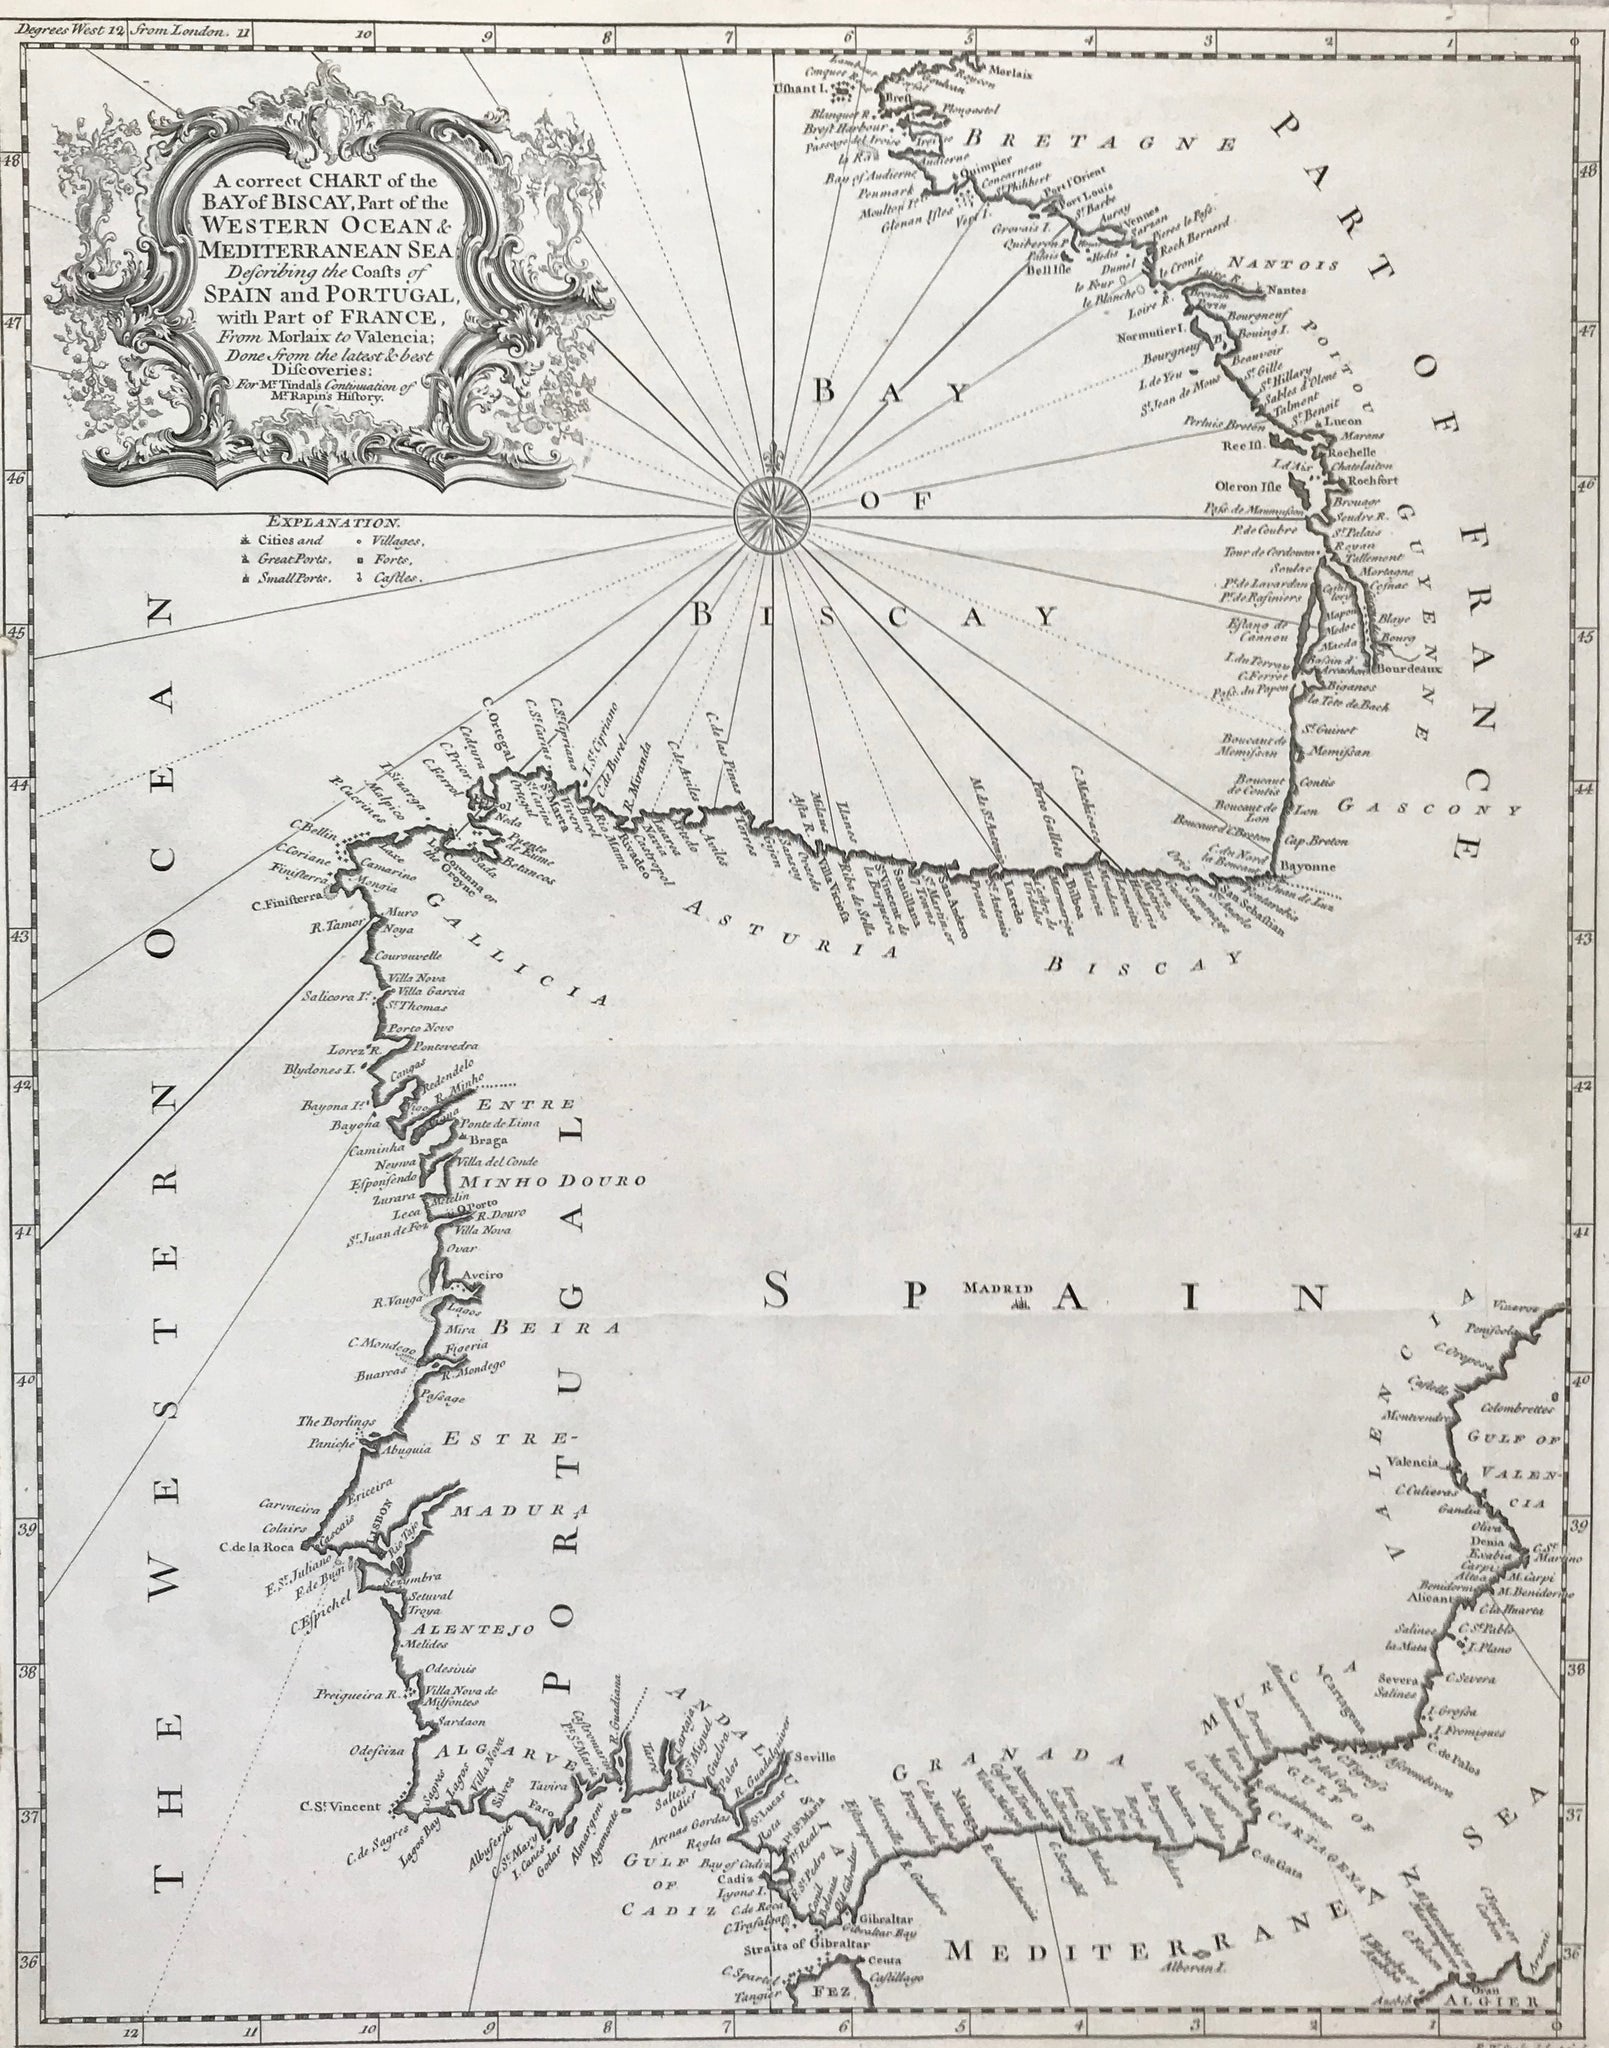 "A correct Chart of the Bay of Biscay, Part of the Western Ocean and Mediterranean Sea describing the Coasts of Spain and Portugal with Part of France from Morlaix to Valencia Done from the latest and best Discoveries"  Portolan map of the Iberian Peninsula (and Western France including the Bretagne)  Type of print: Copperplate etching  Engraver and artist: Richard William Seale (1703-1762)  Published in: "Tindal's Continuation of Rapin's History"  London, ca. 1745